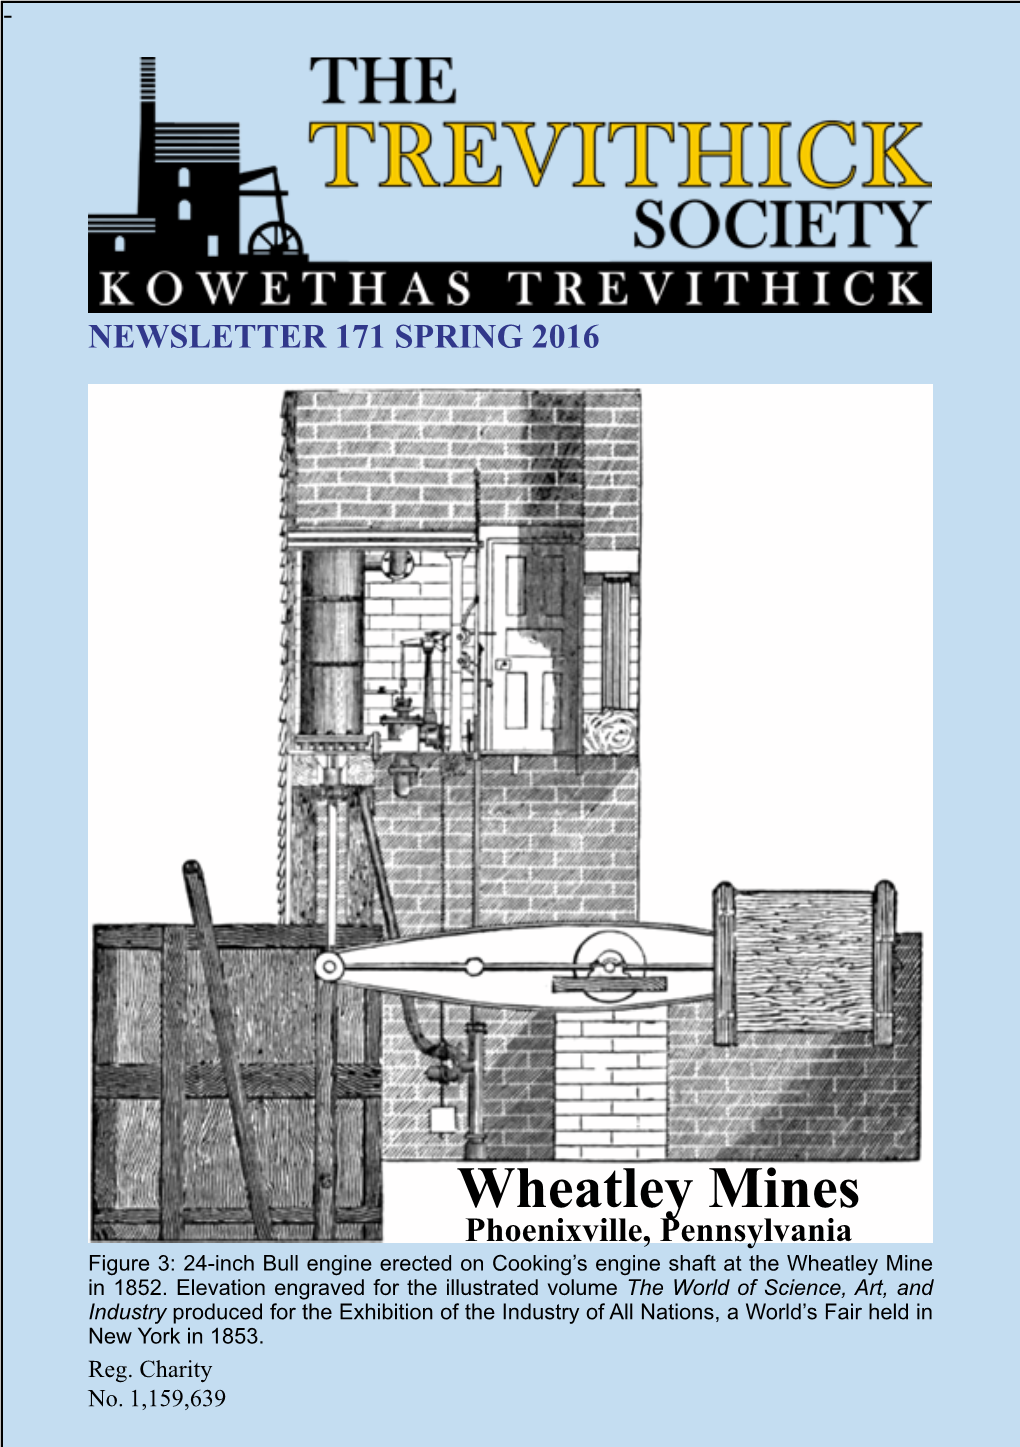 Wheatley Mines Phoenixville, Pennsylvania Figure 3: 24-Inch Bull Engine Erected on Cooking’S Engine Shaft at the Wheatley Mine in 1852